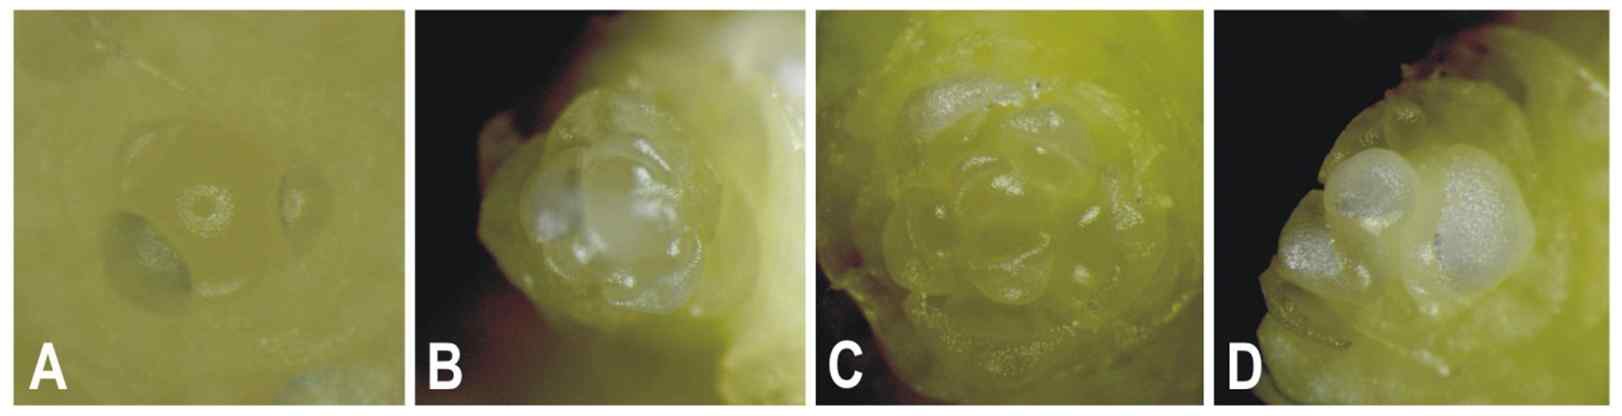 Fig. 4. Differentiation of meristem in Lilium hansonii at 4℃ treatment. A. Before treatment, B. After 30days, C. After 45days, D. After 60days.